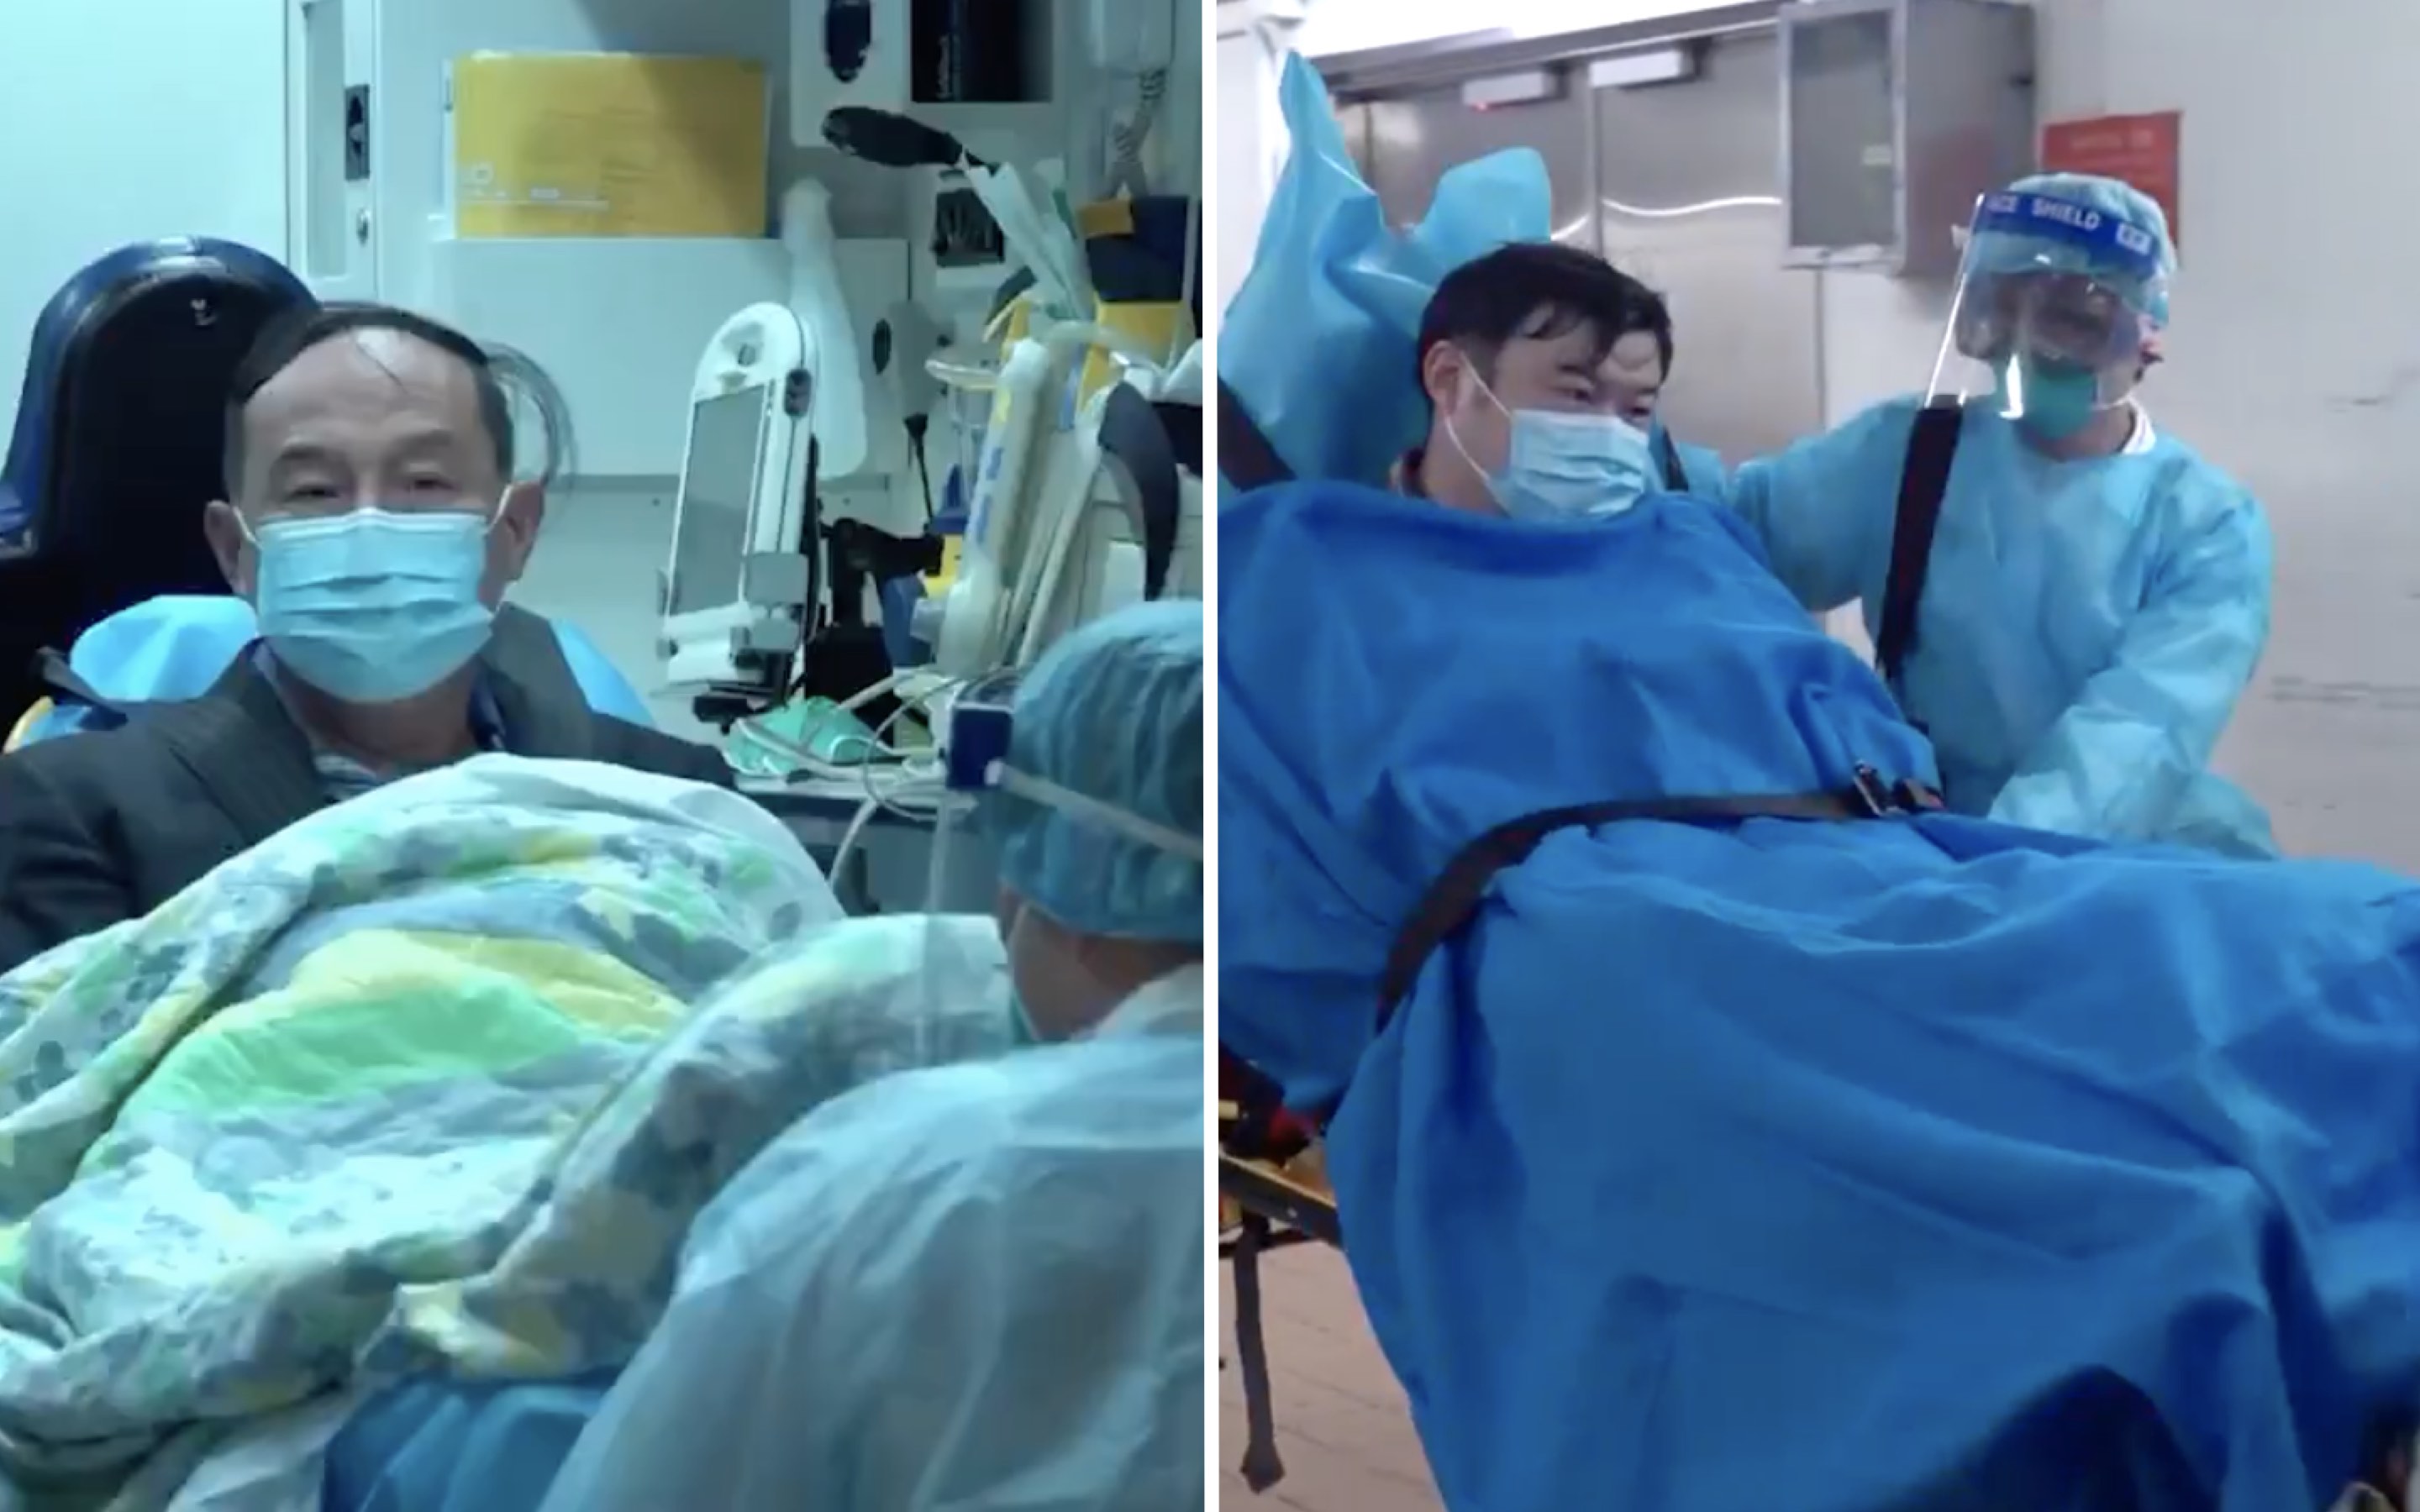 Two men, a 59-year-old man returning to Hong Kong from Wuhan (left) and a 39-year-old tourist from Wuhan (right) are taken to Princess Margaret Hospital after testing positive in preliminary tests for a mystery Wuhan coronavirus. Screengrabs via Facebook video/RTHK.